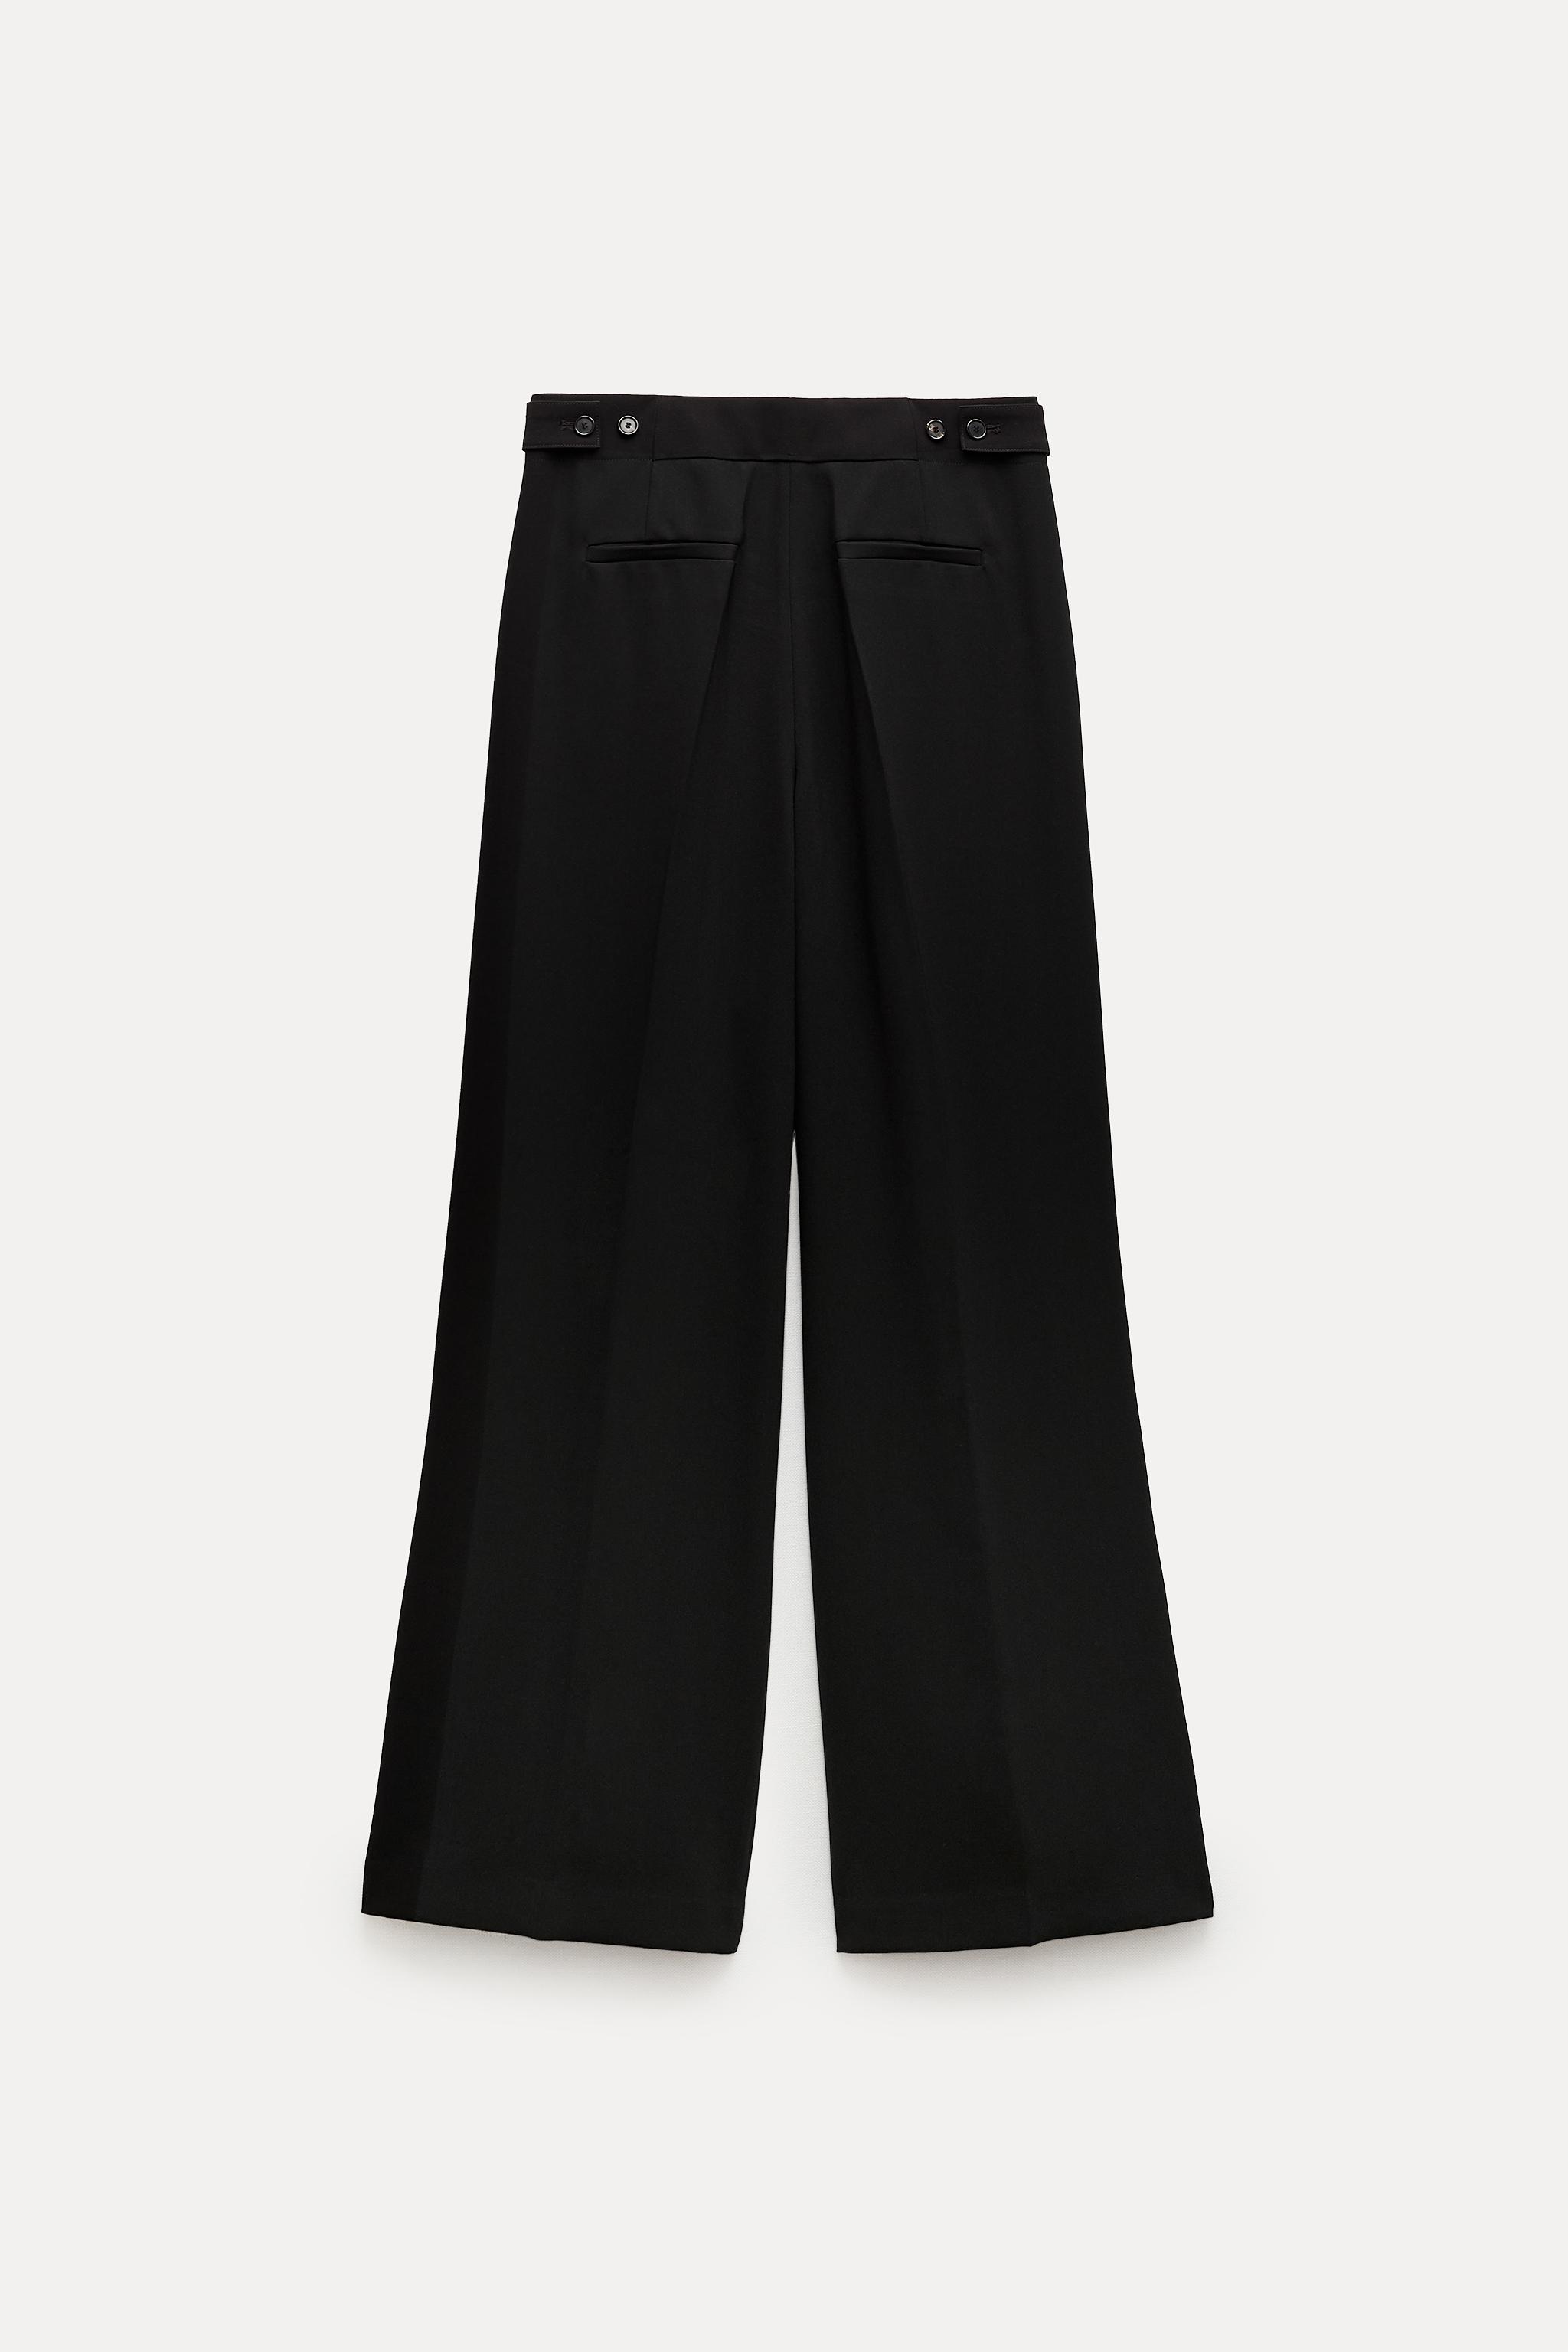 MENSWEAR STYLE PLEATED PANTS ZW COLLECTION - Black | ZARA United 